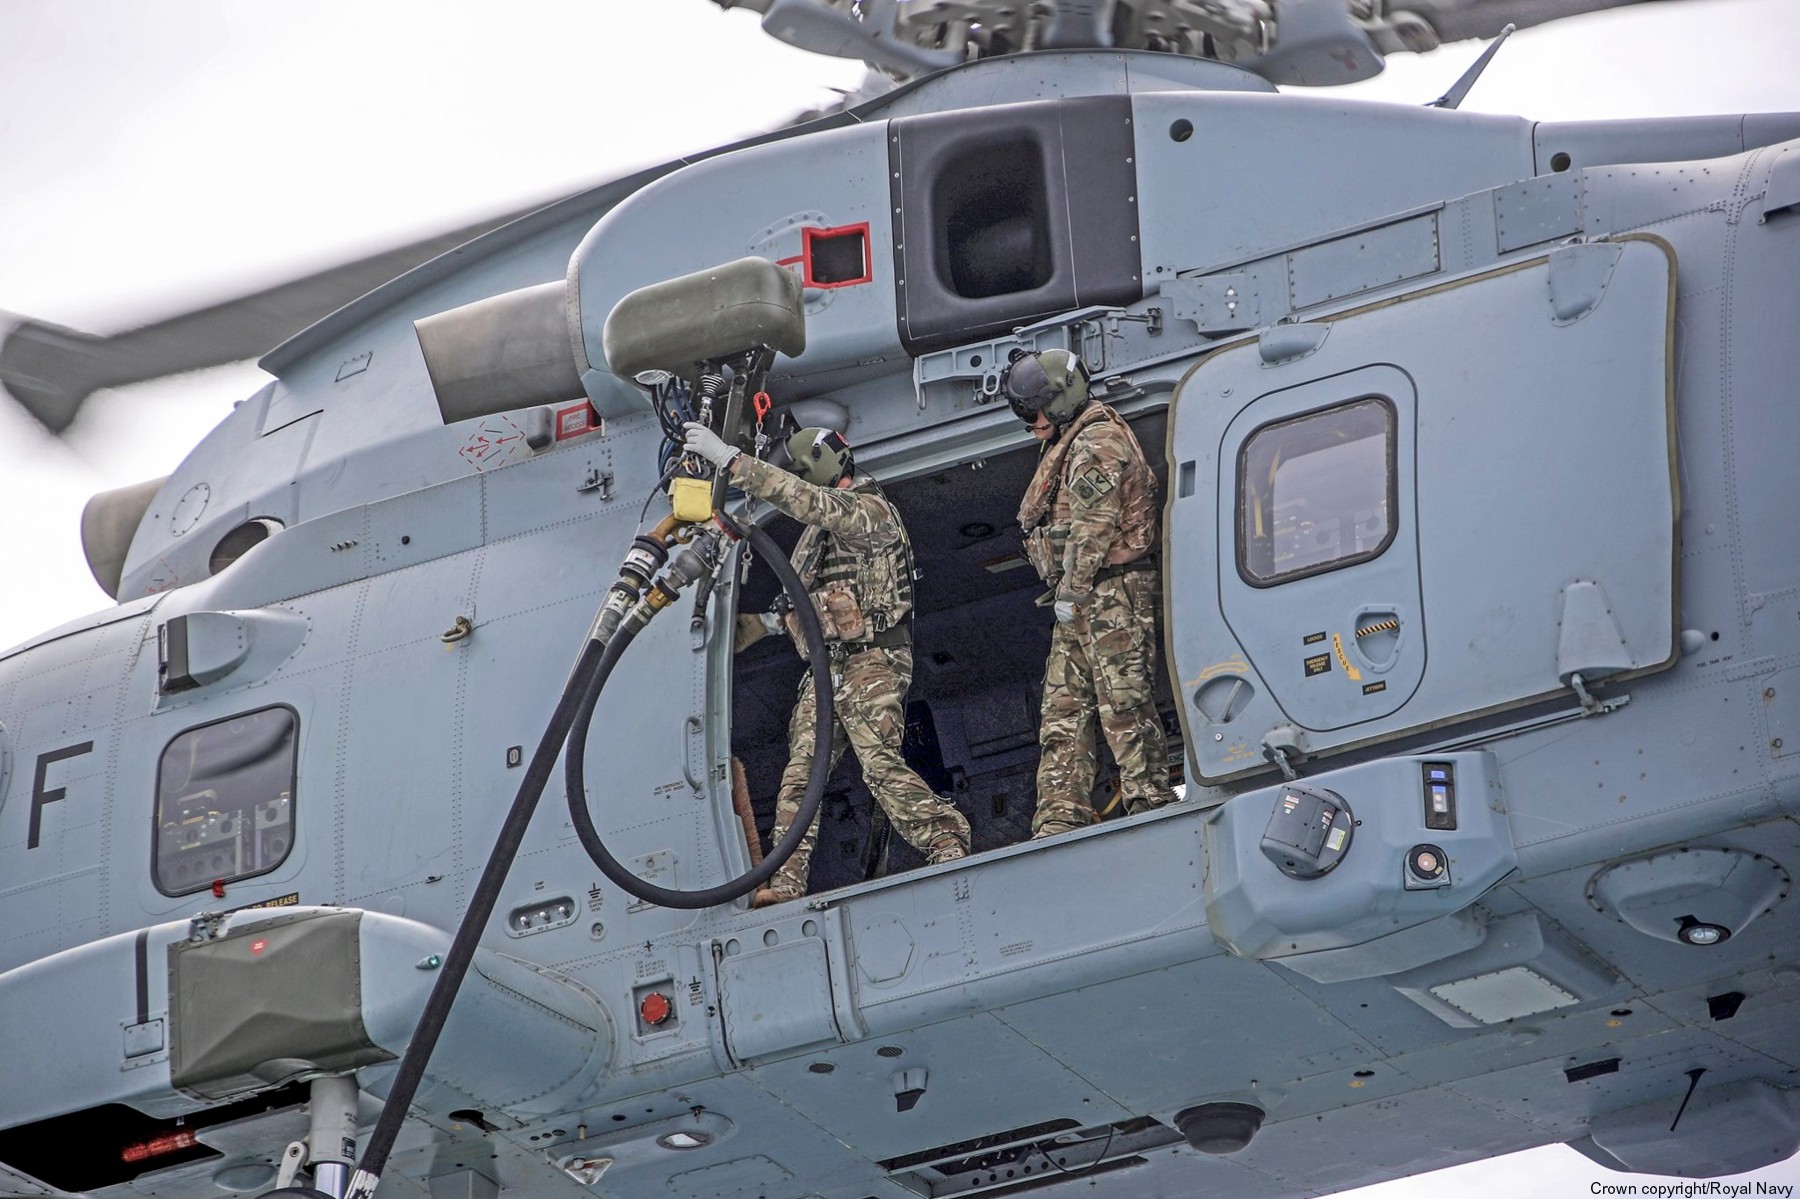 merlin hc4 mk.4 commando helicopter force chf royal navy 845 846 naval air squadron rnas yeovilton aw101 46